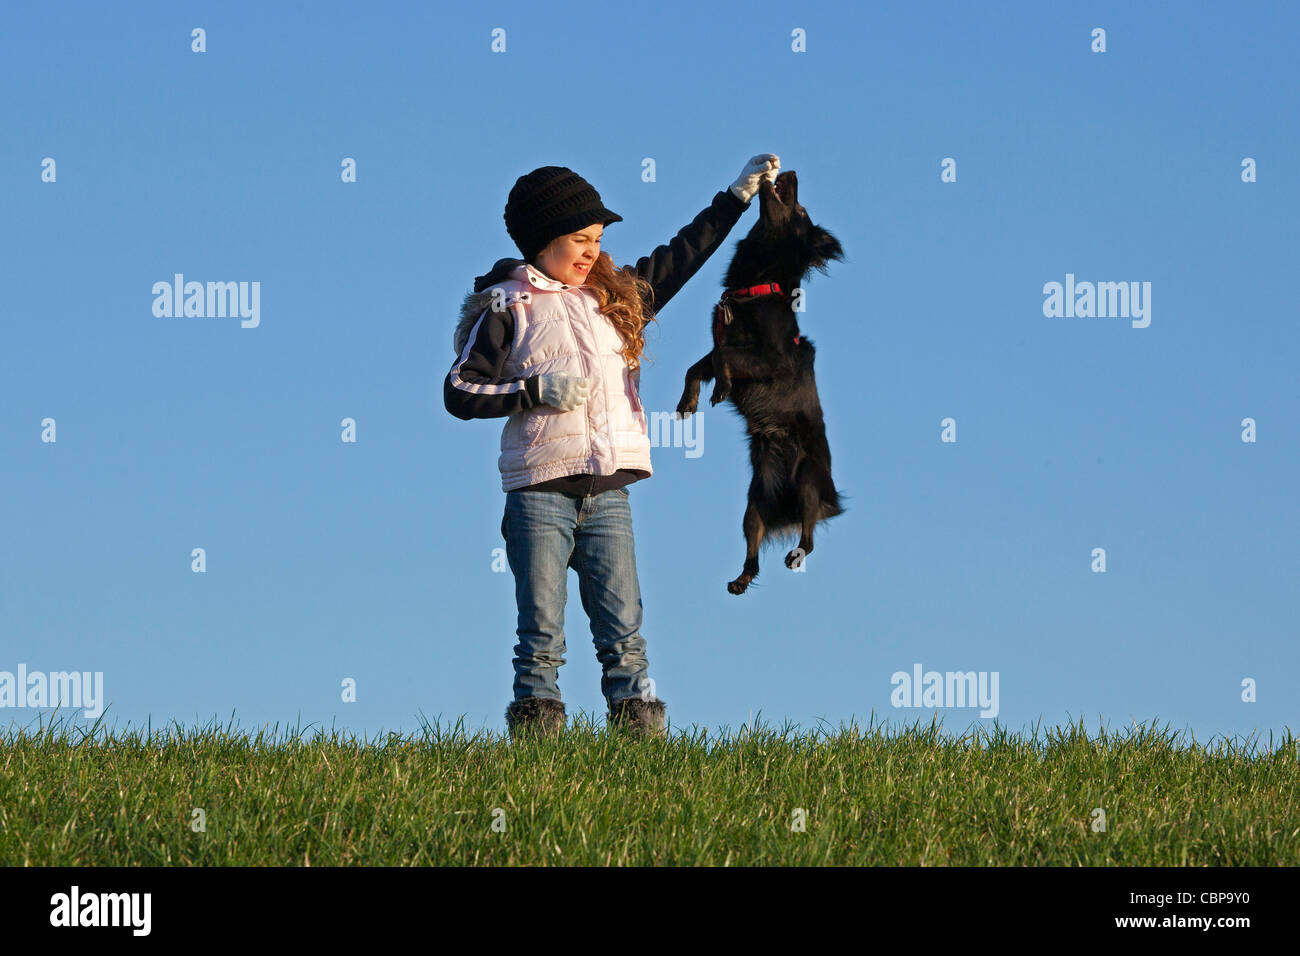 young girl playing with a dog Stock Photo